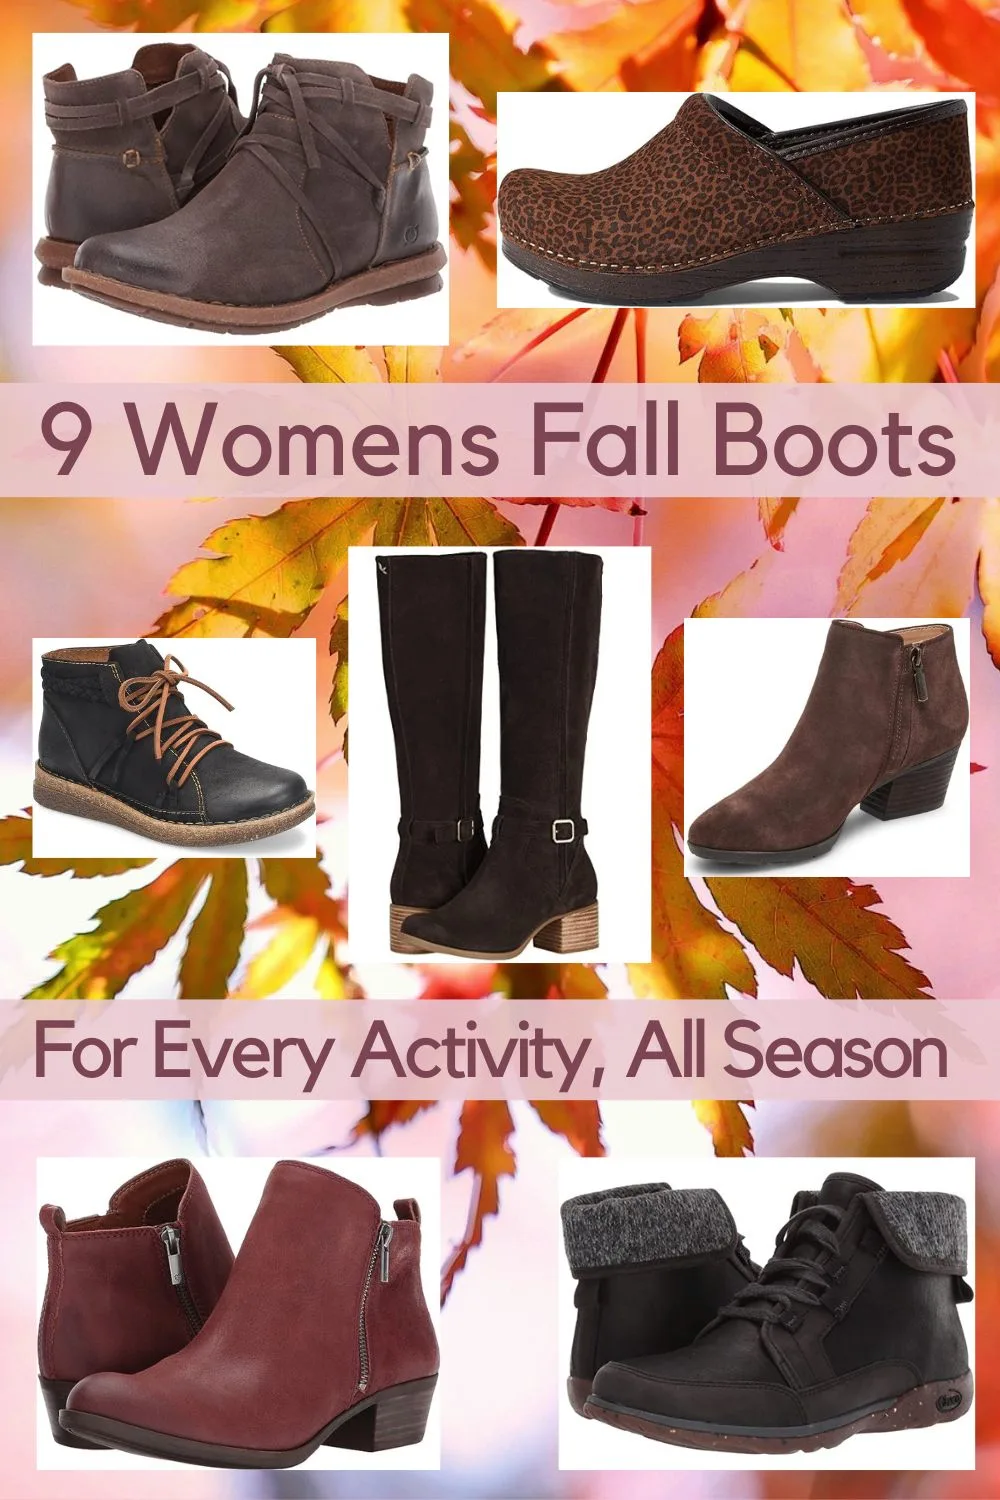 here are 13 women's boots: ankle boots, tall boots, shoeties and more that are trending this fall. they'll keep you comfortable and looking good during all the season's activities. readers' picks, too!